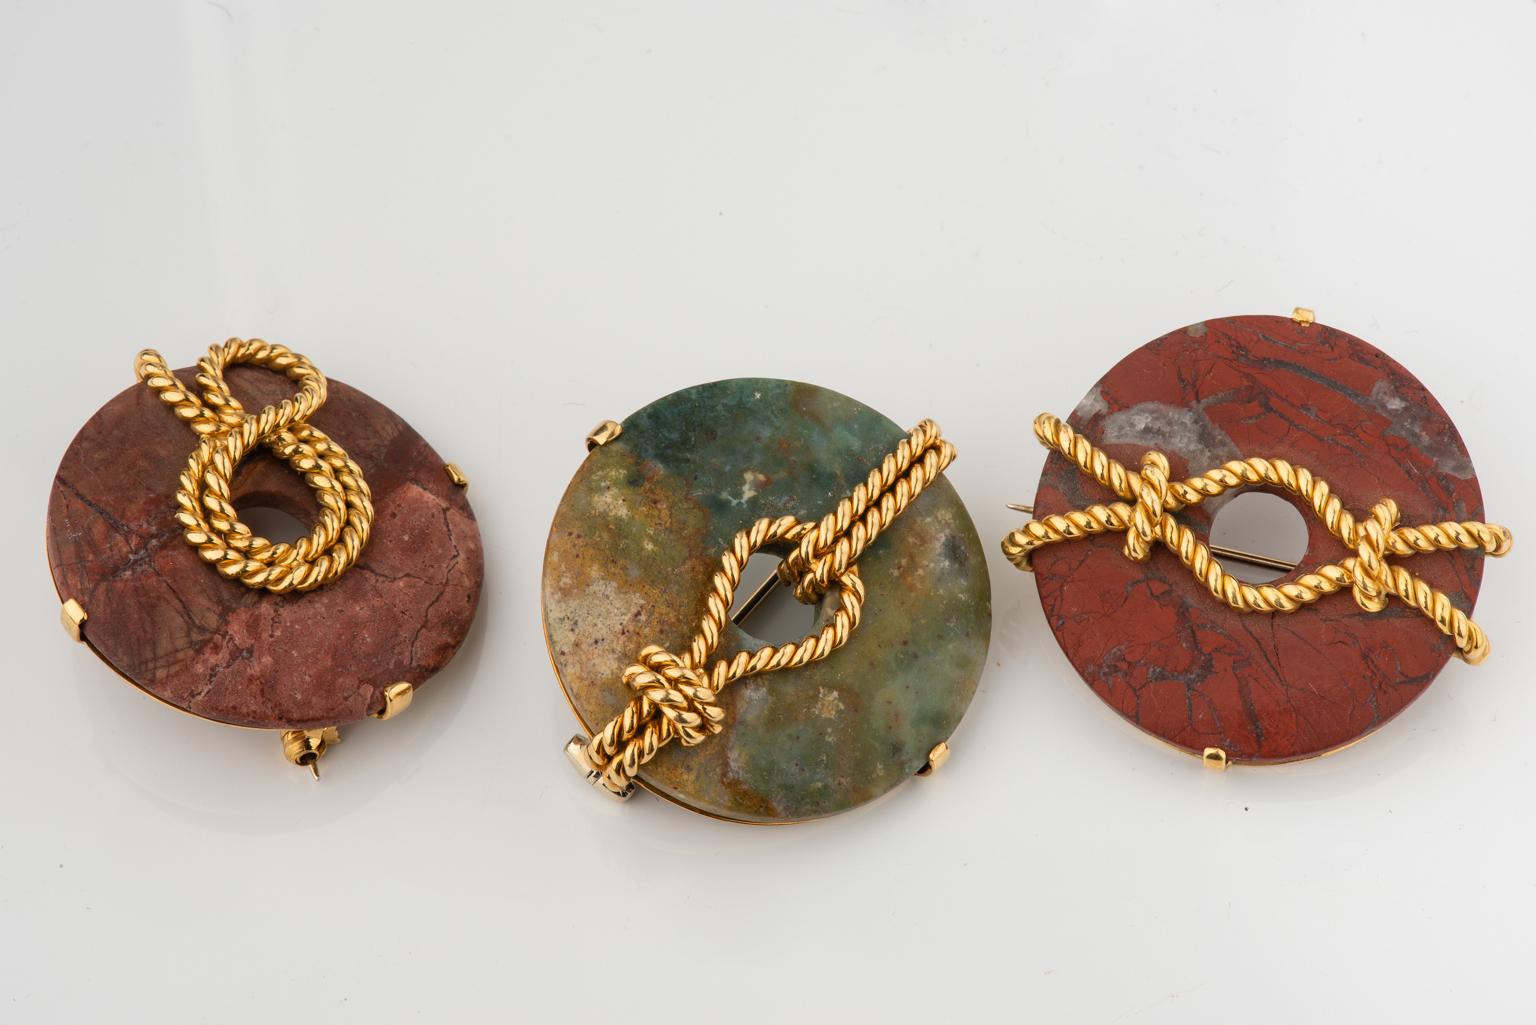 Series of unusual three brooches in jasper with golden different sea nots. Unique pieces.
First left: green jasper (G/91), central: red jasper (G/92), right: red jasper (G/93) -
Measures: Diameter cm. 3.5/4 x thickness cm. 1/1.5
The price is for